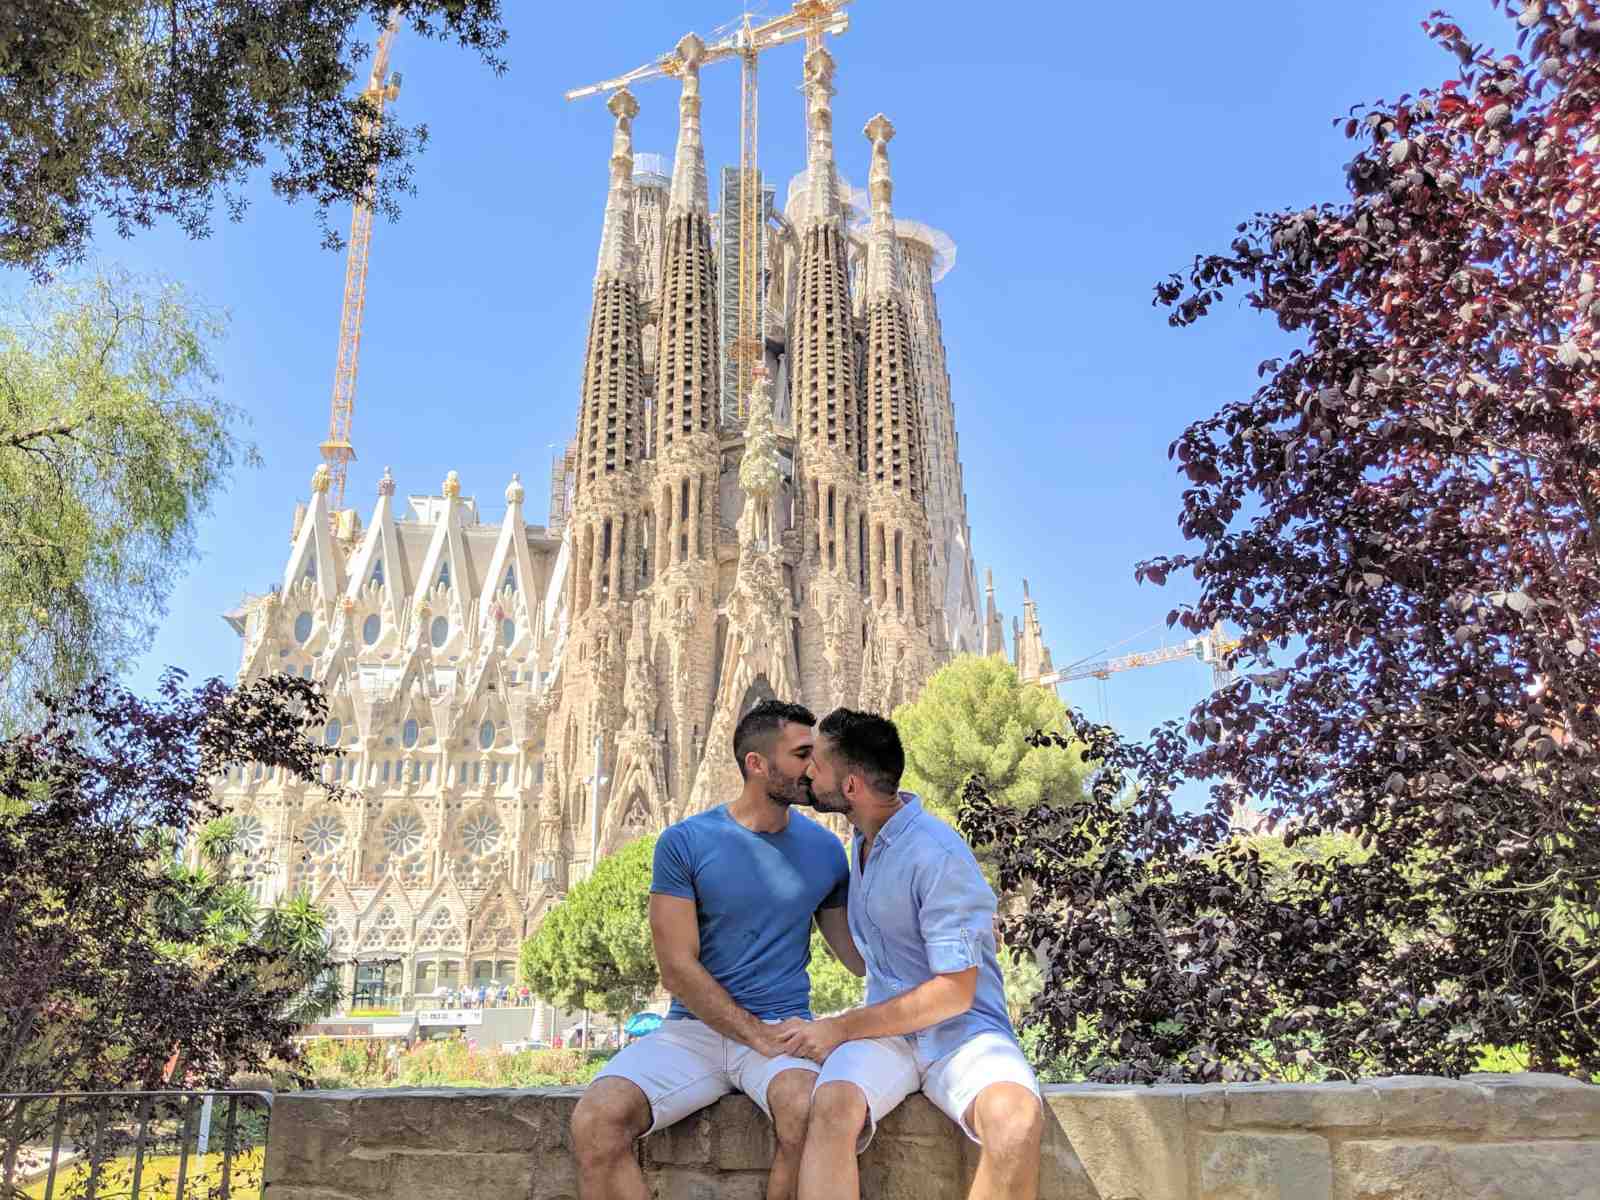 Close to lots of great beaches and with a great gay scene, Barcelona is a must-visit for gay travellers